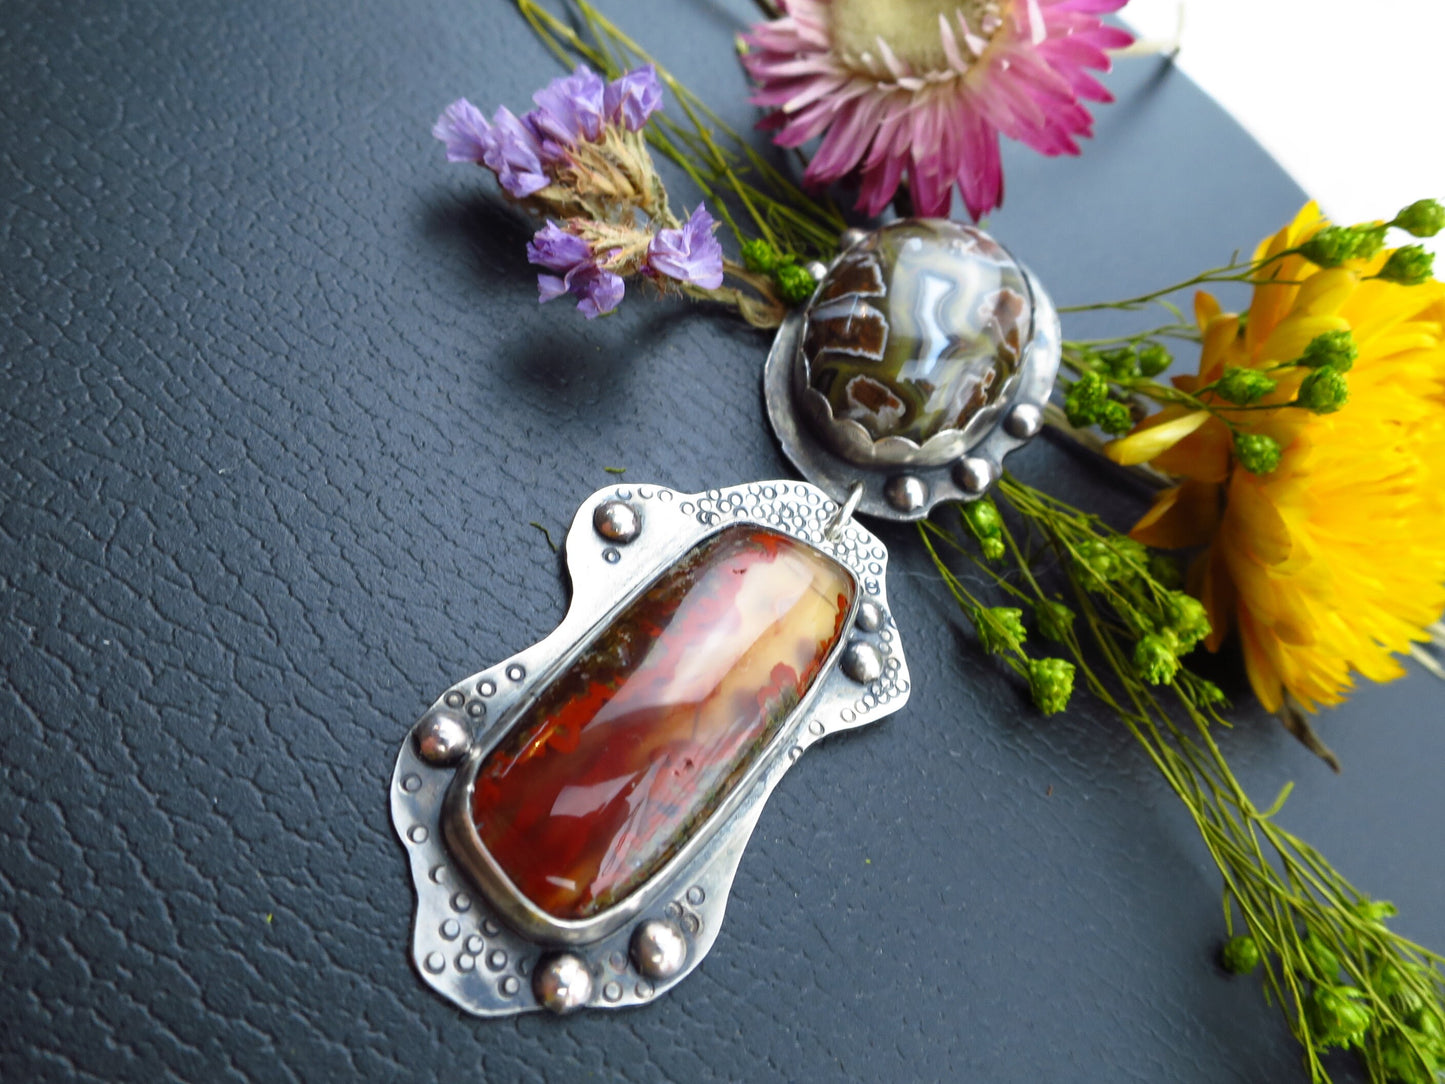 Fantastic Agate cabochon silver pendant Moroccan agate and Pseudomorph agate self cut set in 925 Sterling Silver untreated natural agate